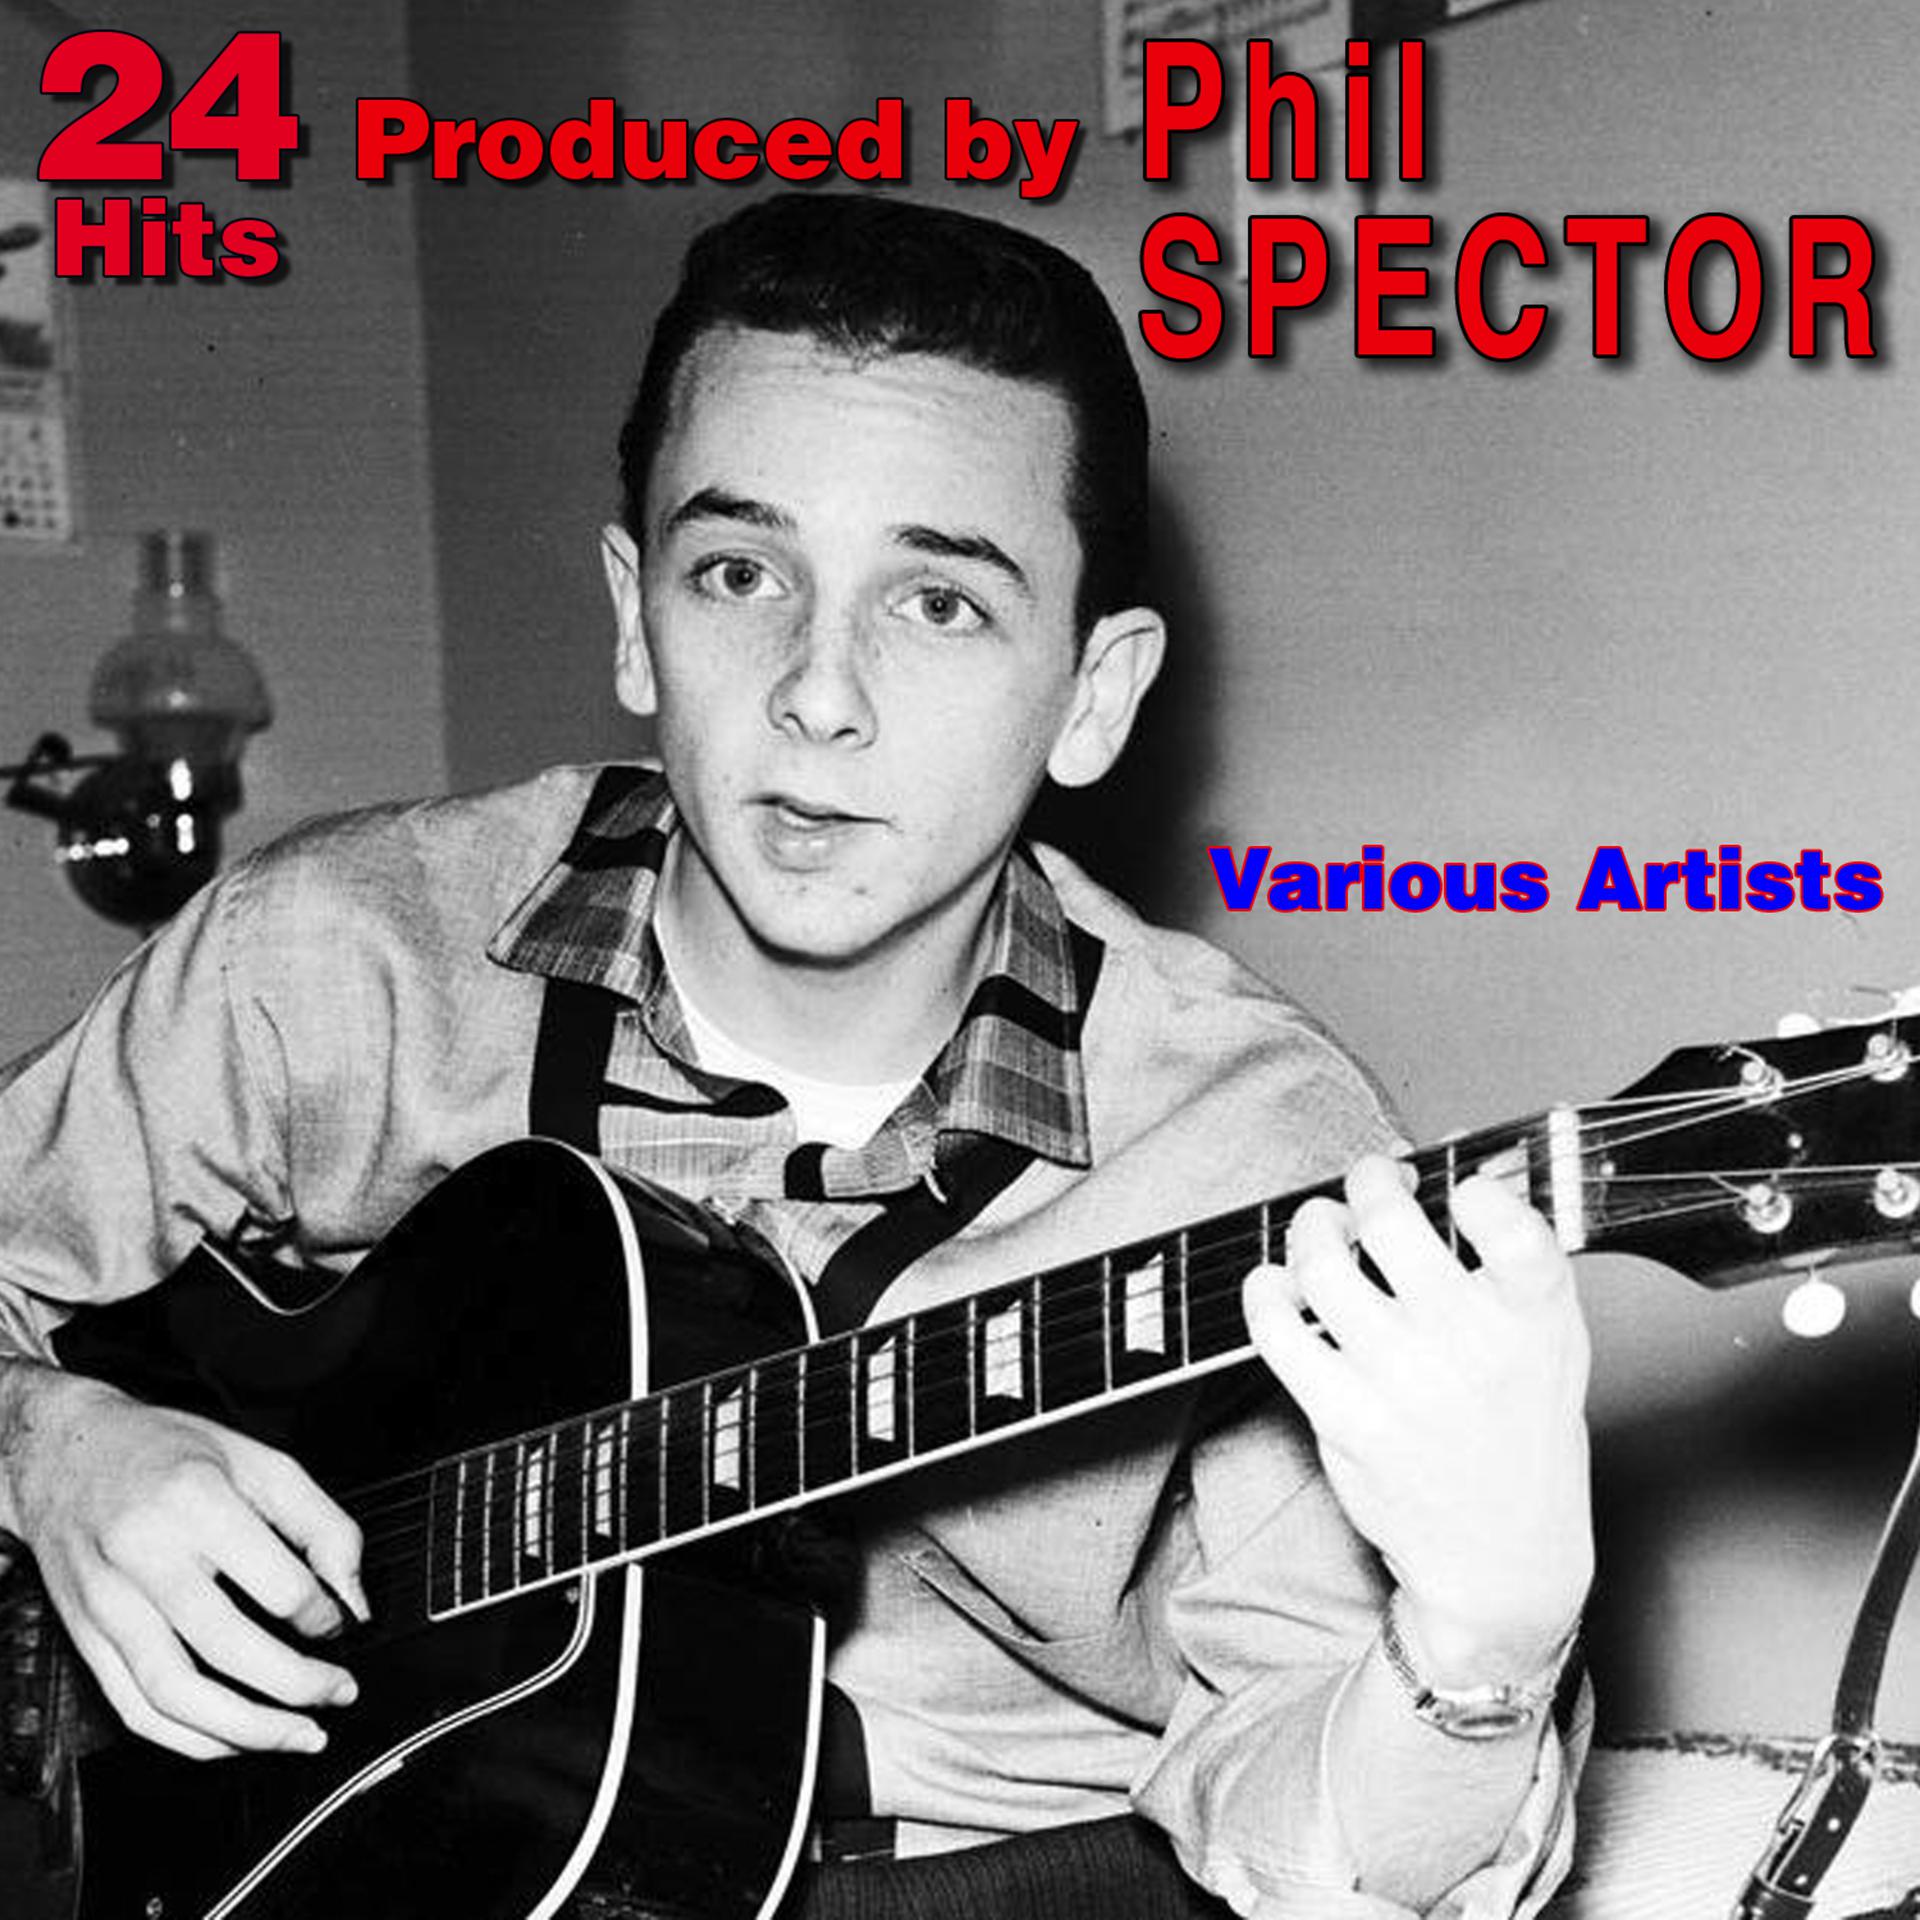 Постер альбома 24 Hits Produced By Phil Spector